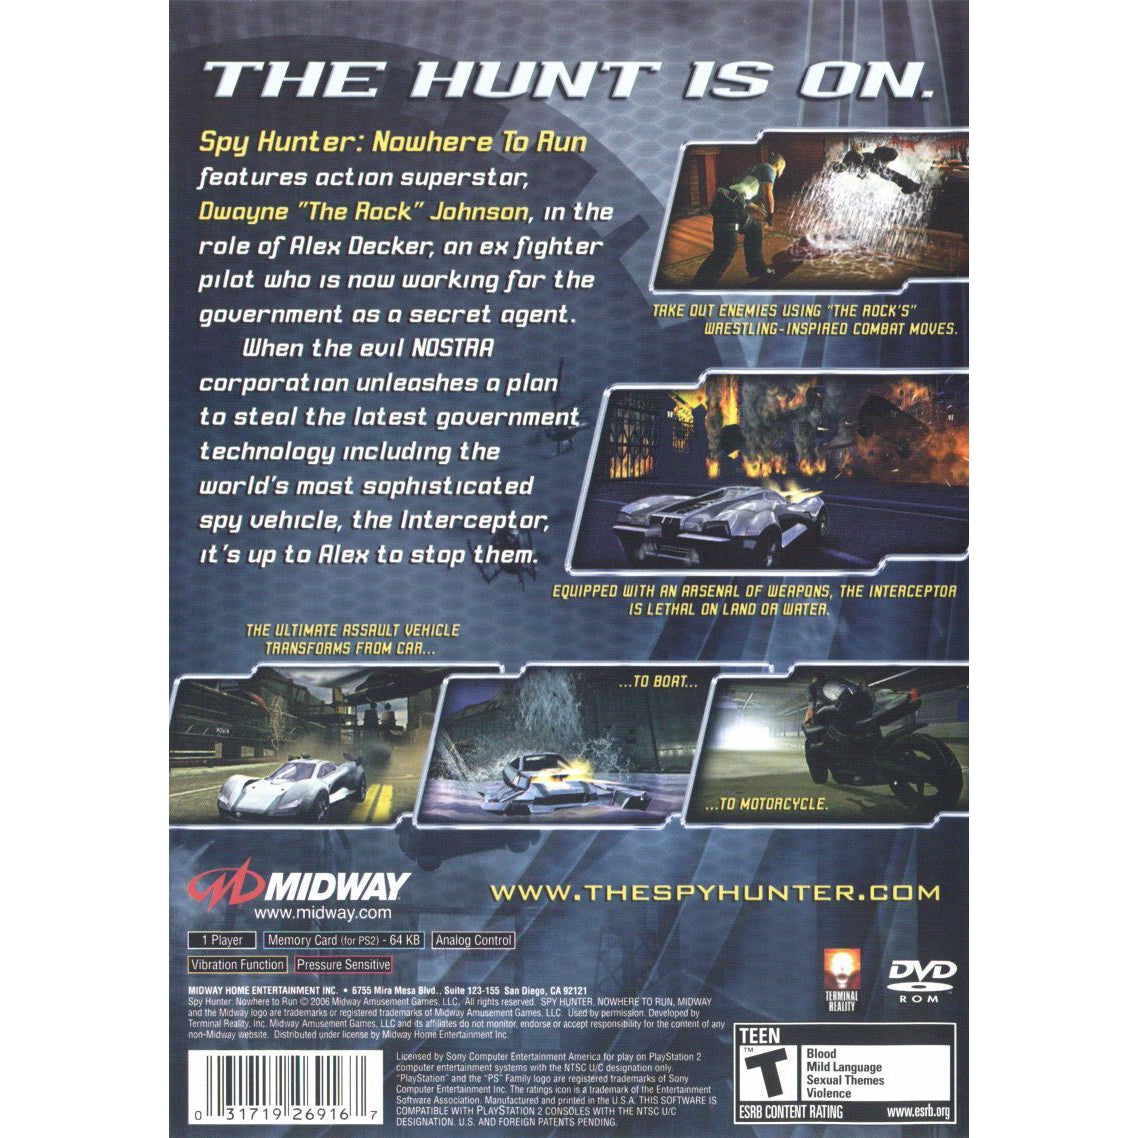 Spy Hunter: Nowhere to Run - PlayStation 2 (PS2) Game Complete - YourGamingShop.com - Buy, Sell, Trade Video Games Online. 120 Day Warranty. Satisfaction Guaranteed.